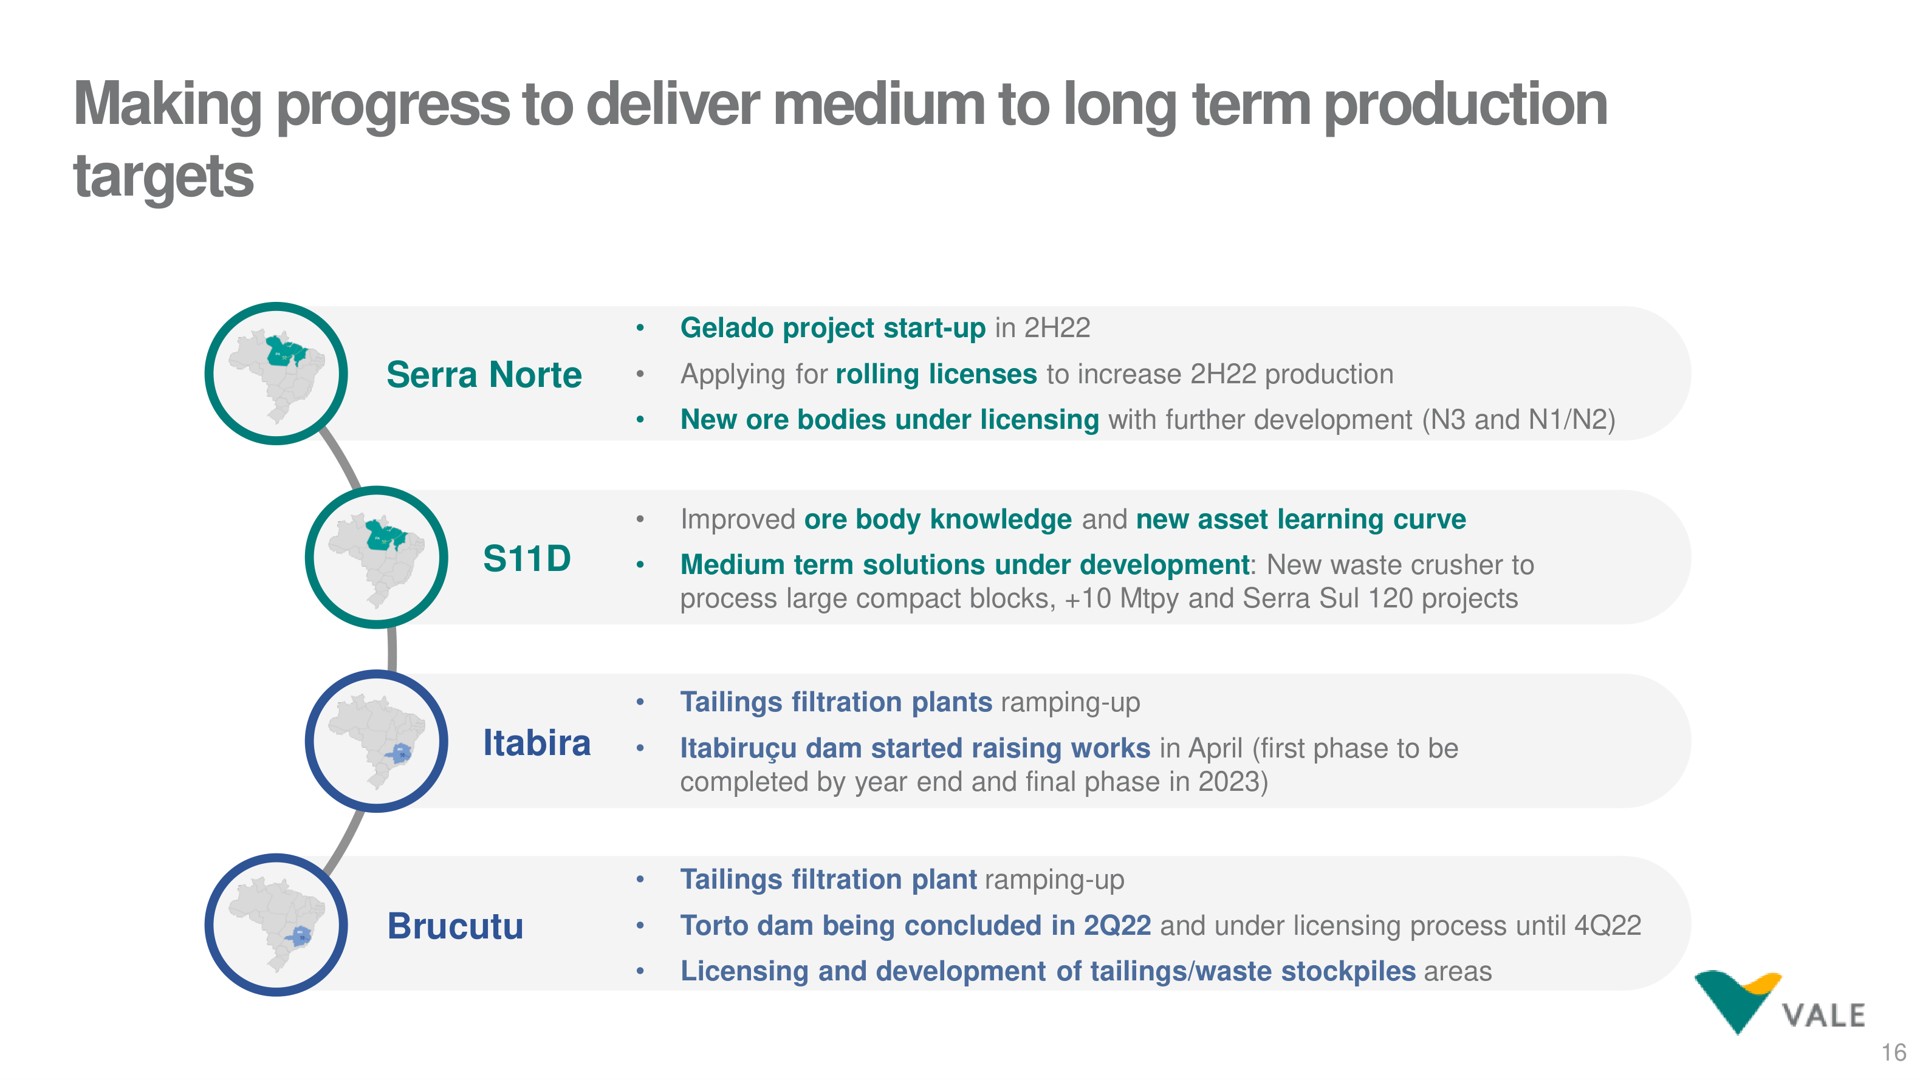 making progress to deliver medium to long term production targets | Vale